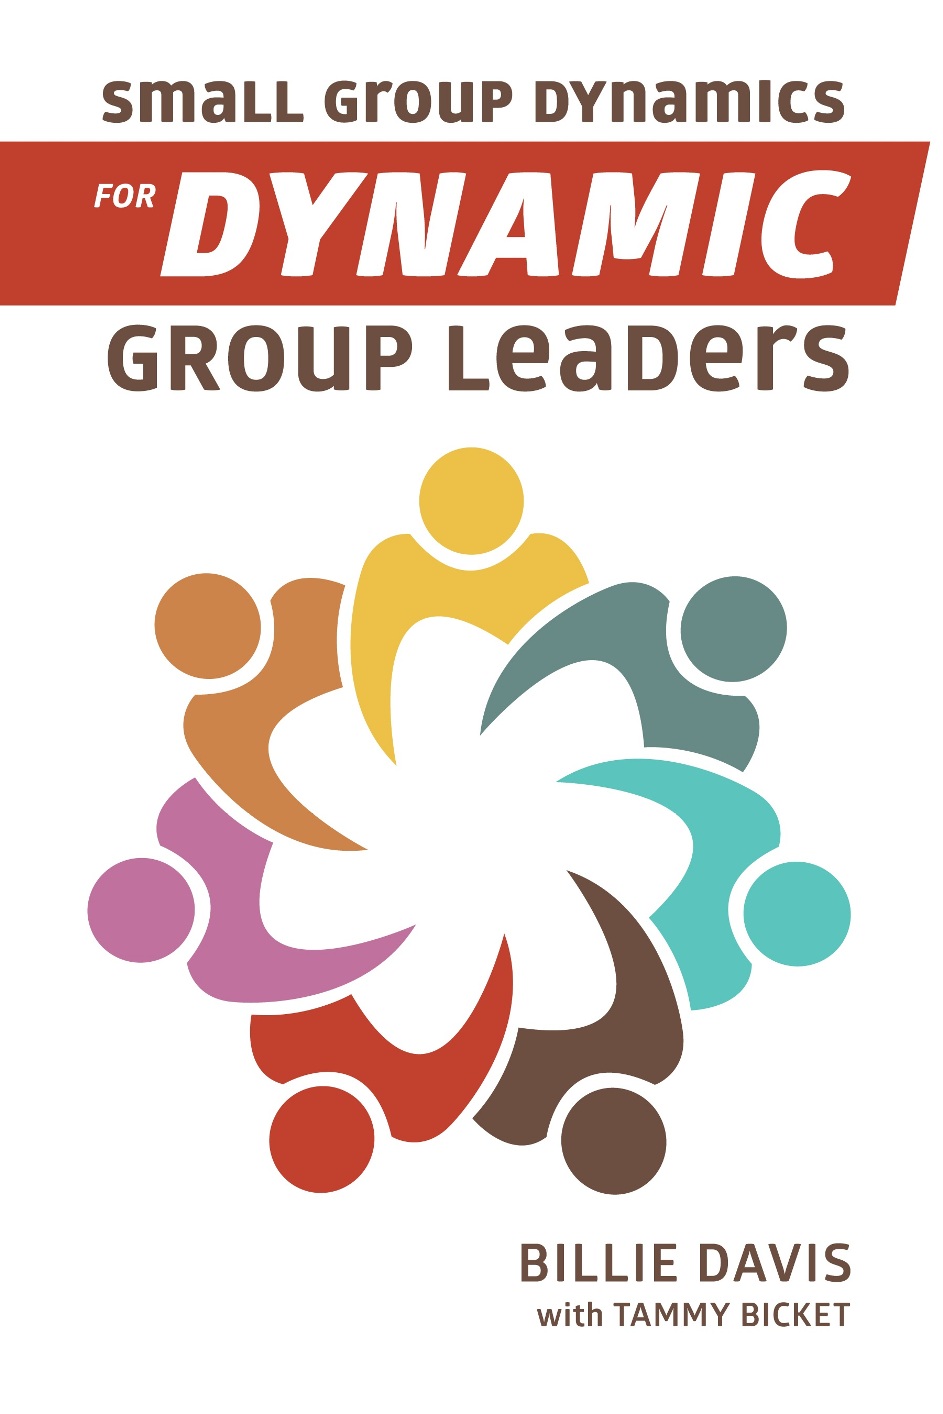 Small Group Dynamics for Dynamic Group Leaders BILLIE DAVIS 2018 - photo 1